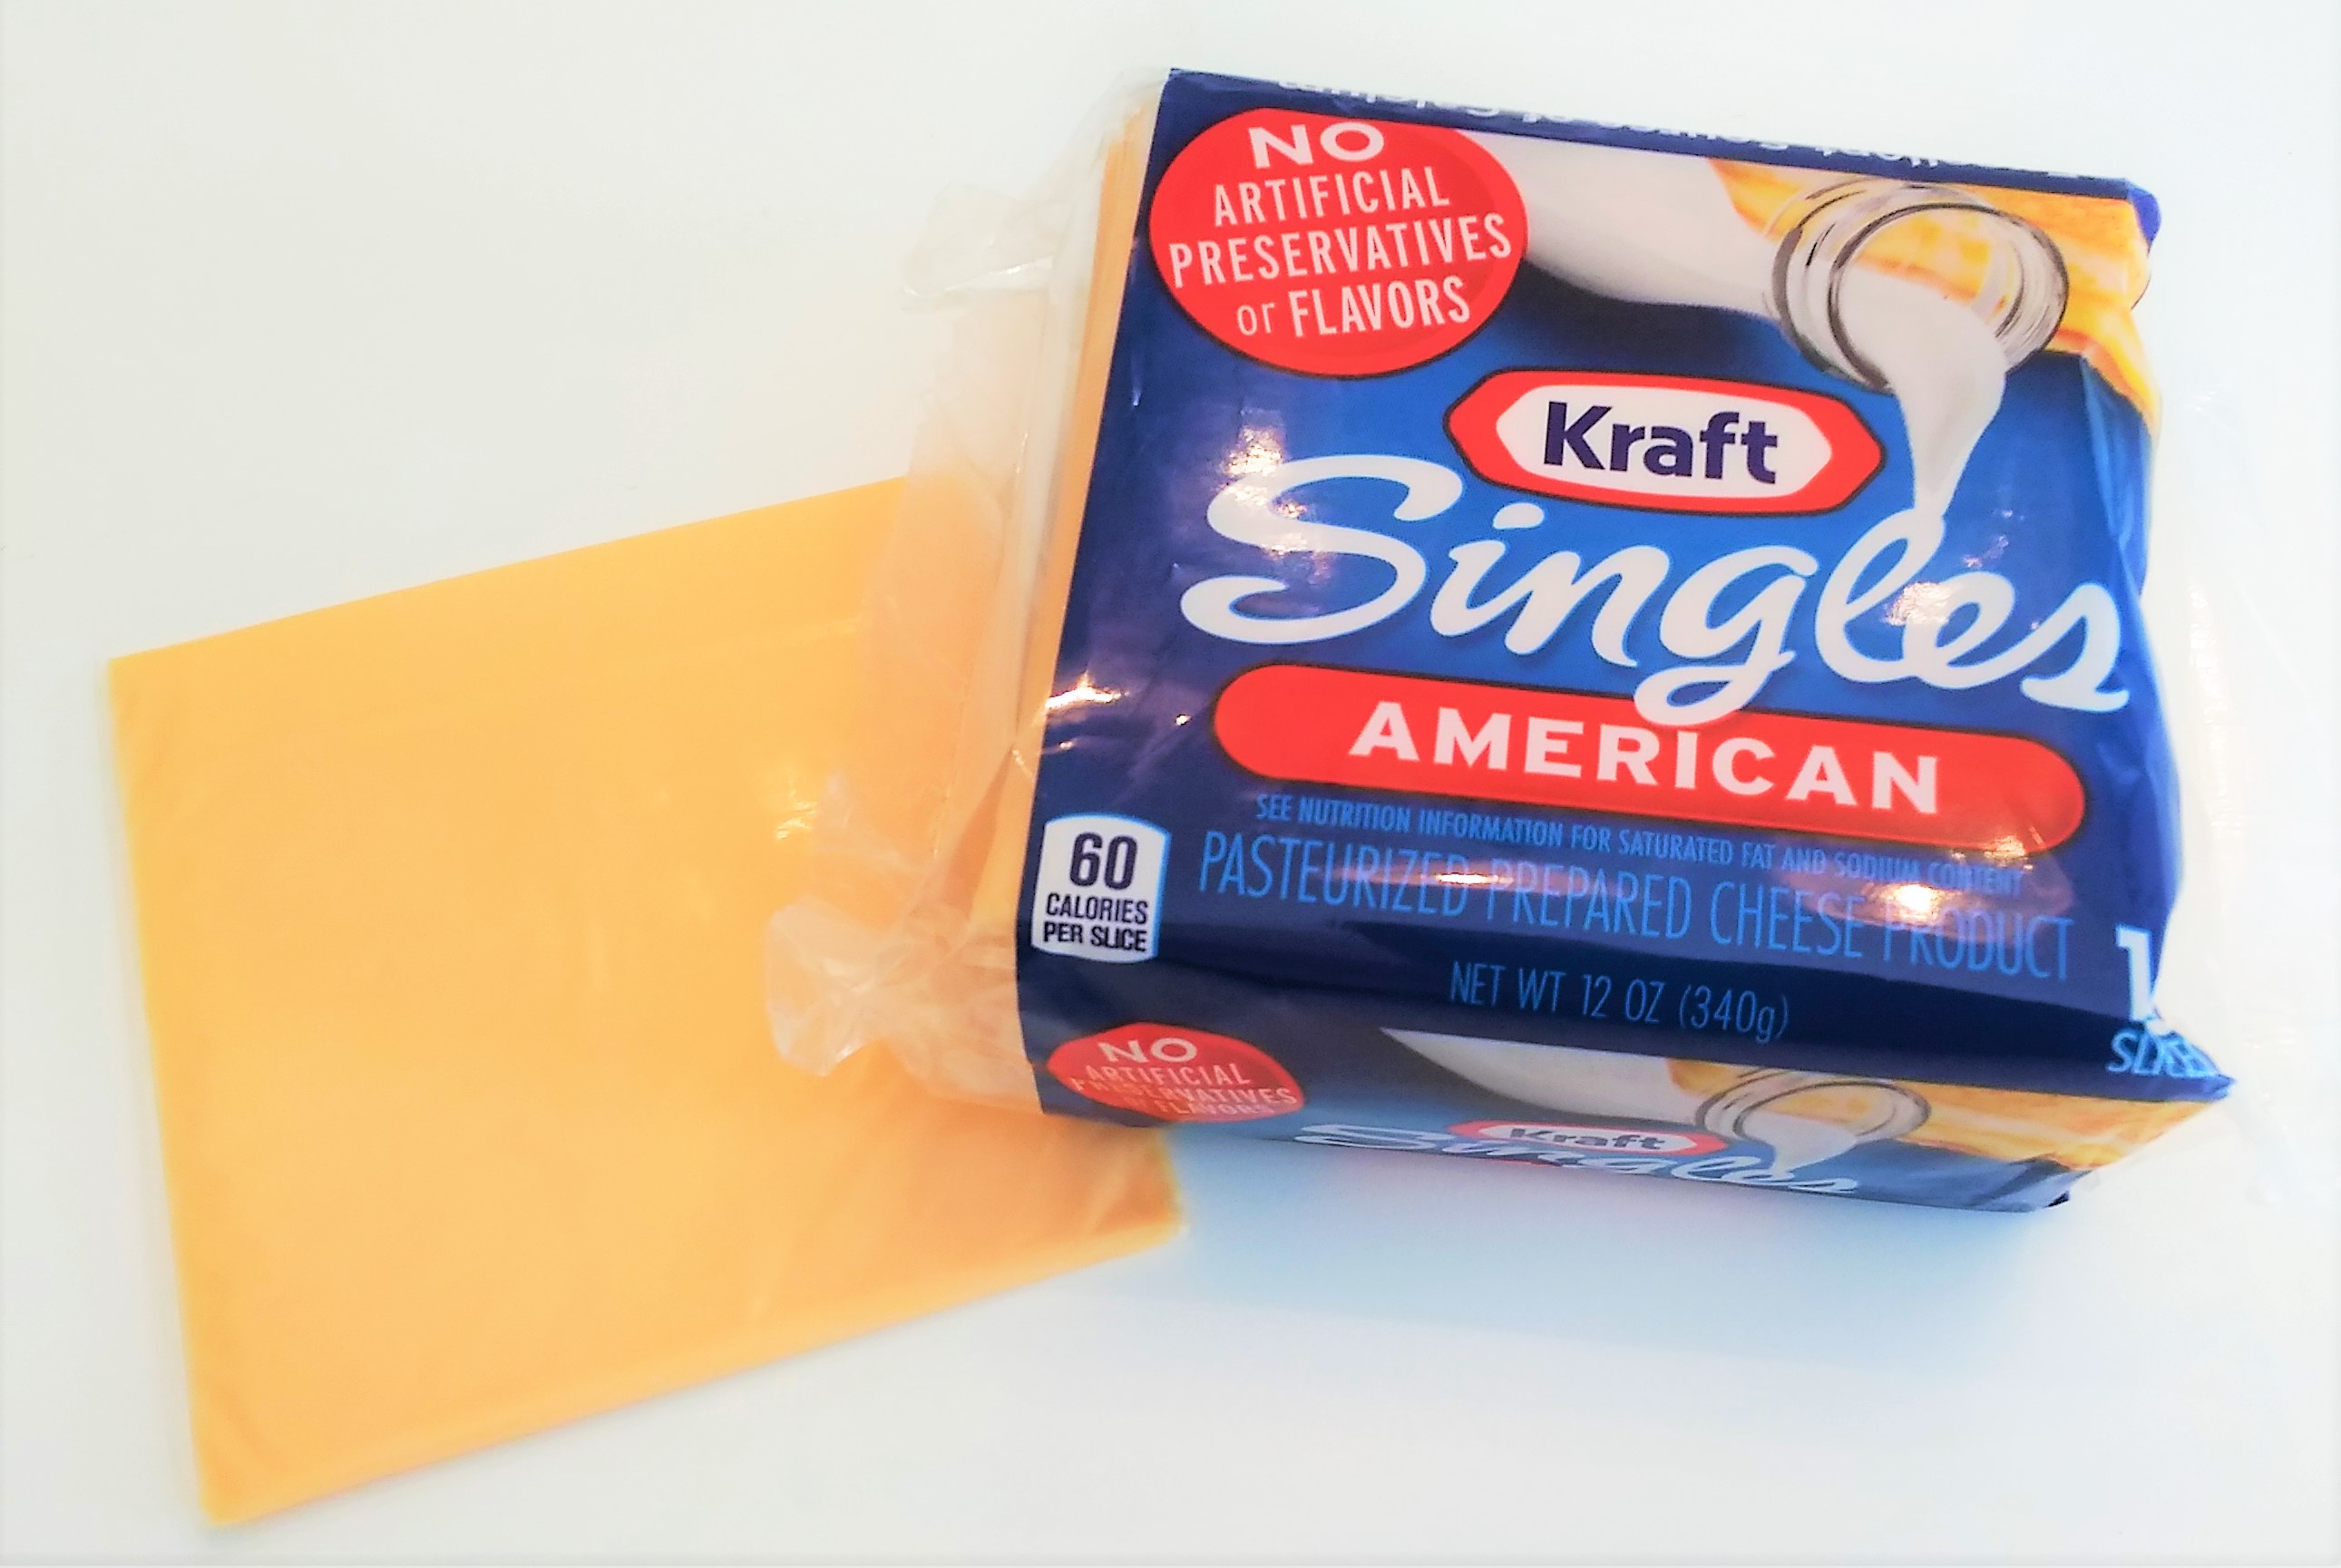 kraft singles - No Artificial Preservatives or Flavors Singles American See Meltritain Information For Saturates Taca 60 Pasteurized Prepared Cheese Product Calories Per Slice Net Wt 12 07 340 No Cial Matras Sir